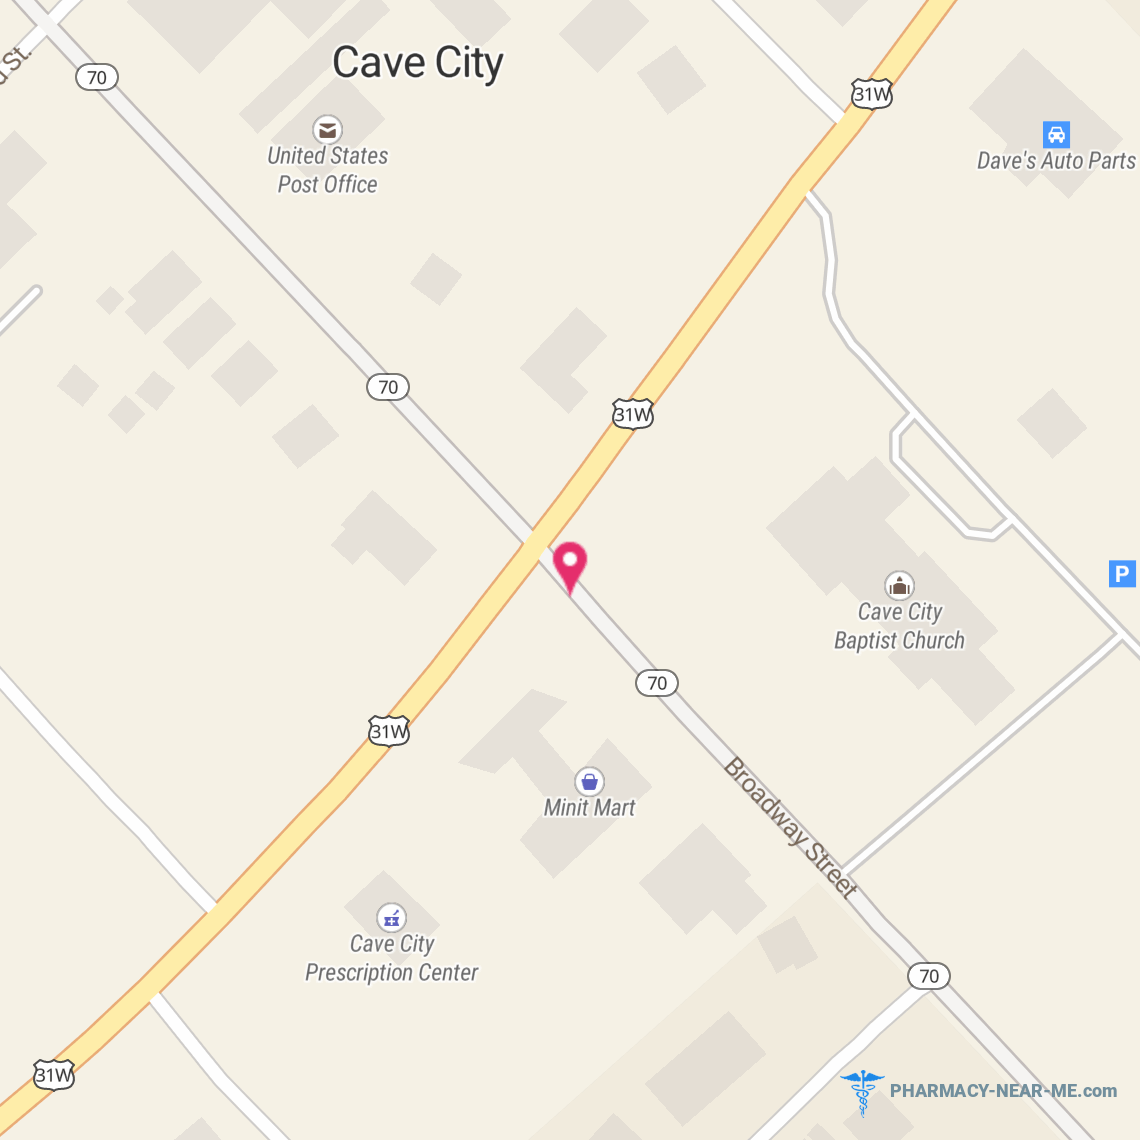 CAVE CITY PRESCRIPTION CENTER INC - Pharmacy Hours, Phone, Reviews & Information: 101 South Dixie Highway, Cave City, Kentucky 42127, United States